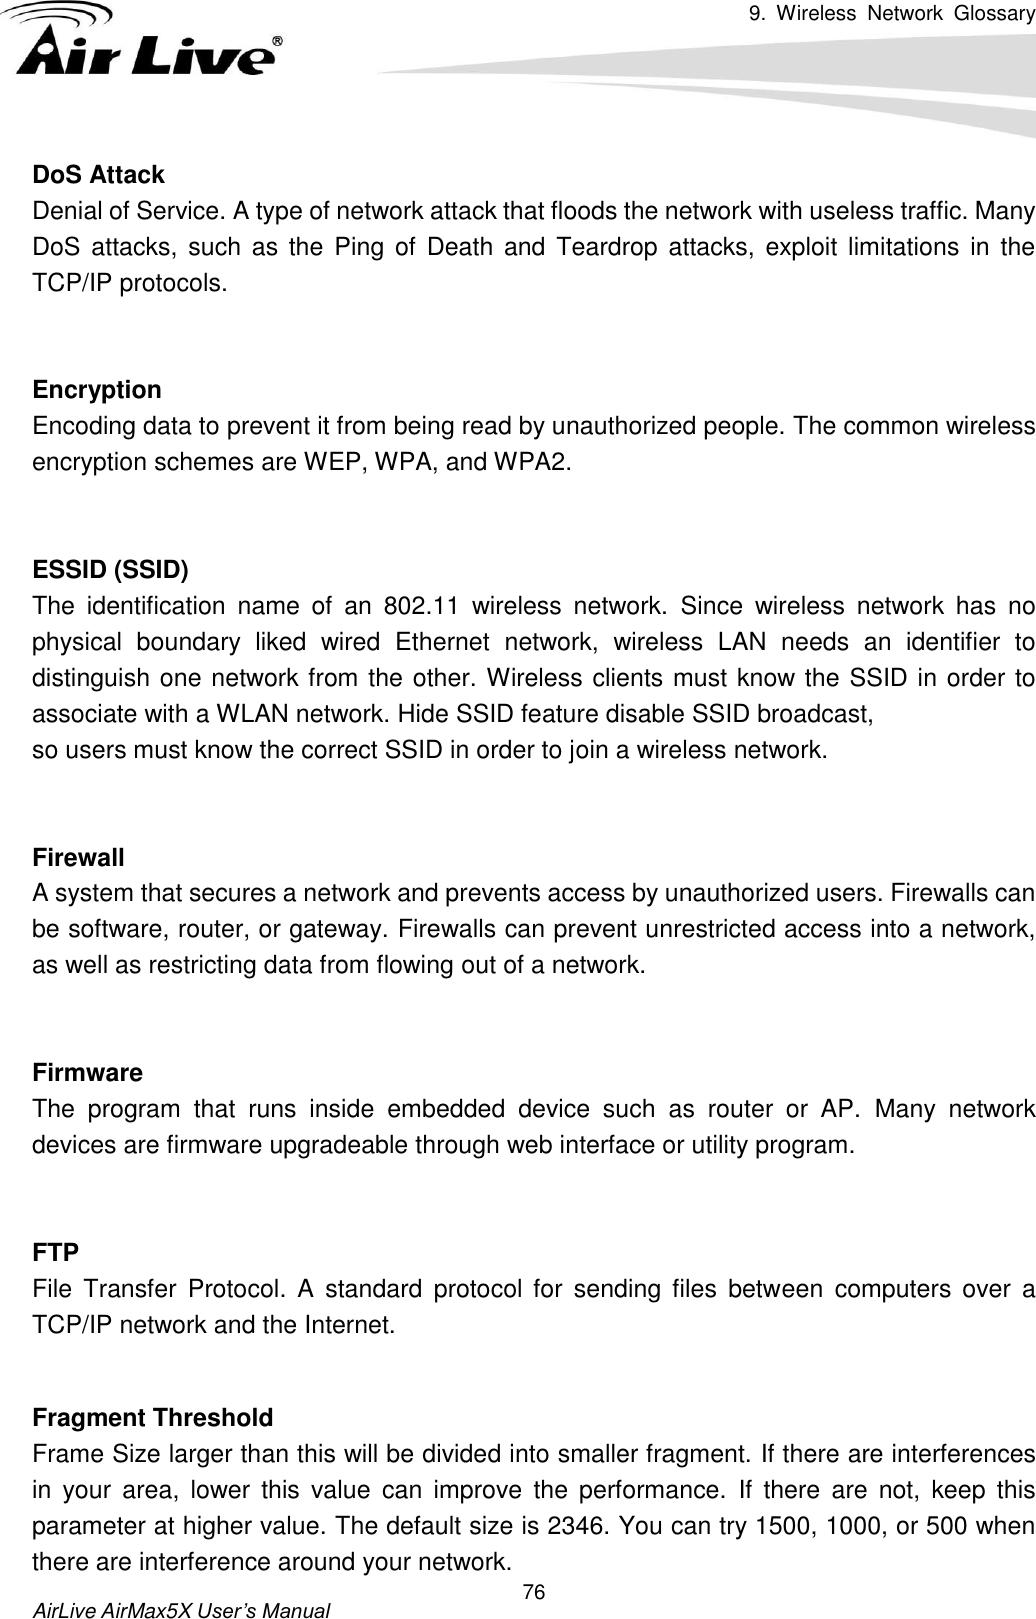 9.  Wireless  Network  Glossary       AirLive AirMax5X User’s Manual 76 DoS Attack Denial of Service. A type of network attack that floods the network with useless traffic. Many DoS  attacks, such as the Ping  of  Death and  Teardrop attacks, exploit limitations in the TCP/IP protocols.   Encryption Encoding data to prevent it from being read by unauthorized people. The common wireless encryption schemes are WEP, WPA, and WPA2.   ESSID (SSID) The  identification  name  of  an  802.11  wireless  network.  Since  wireless  network  has  no physical  boundary  liked  wired  Ethernet  network,  wireless  LAN  needs  an  identifier  to distinguish one network from the other. Wireless clients must know the SSID in order to associate with a WLAN network. Hide SSID feature disable SSID broadcast,   so users must know the correct SSID in order to join a wireless network.   Firewall A system that secures a network and prevents access by unauthorized users. Firewalls can be software, router, or gateway. Firewalls can prevent unrestricted access into a network, as well as restricting data from flowing out of a network.   Firmware The  program  that  runs  inside  embedded  device  such  as  router  or  AP.  Many  network devices are firmware upgradeable through web interface or utility program.   FTP File  Transfer  Protocol.  A  standard  protocol  for  sending  files  between  computers  over  a TCP/IP network and the Internet.   Fragment Threshold Frame Size larger than this will be divided into smaller fragment. If there are interferences in  your  area,  lower  this  value  can  improve  the  performance.  If  there  are  not,  keep  this parameter at higher value. The default size is 2346. You can try 1500, 1000, or 500 when there are interference around your network. 